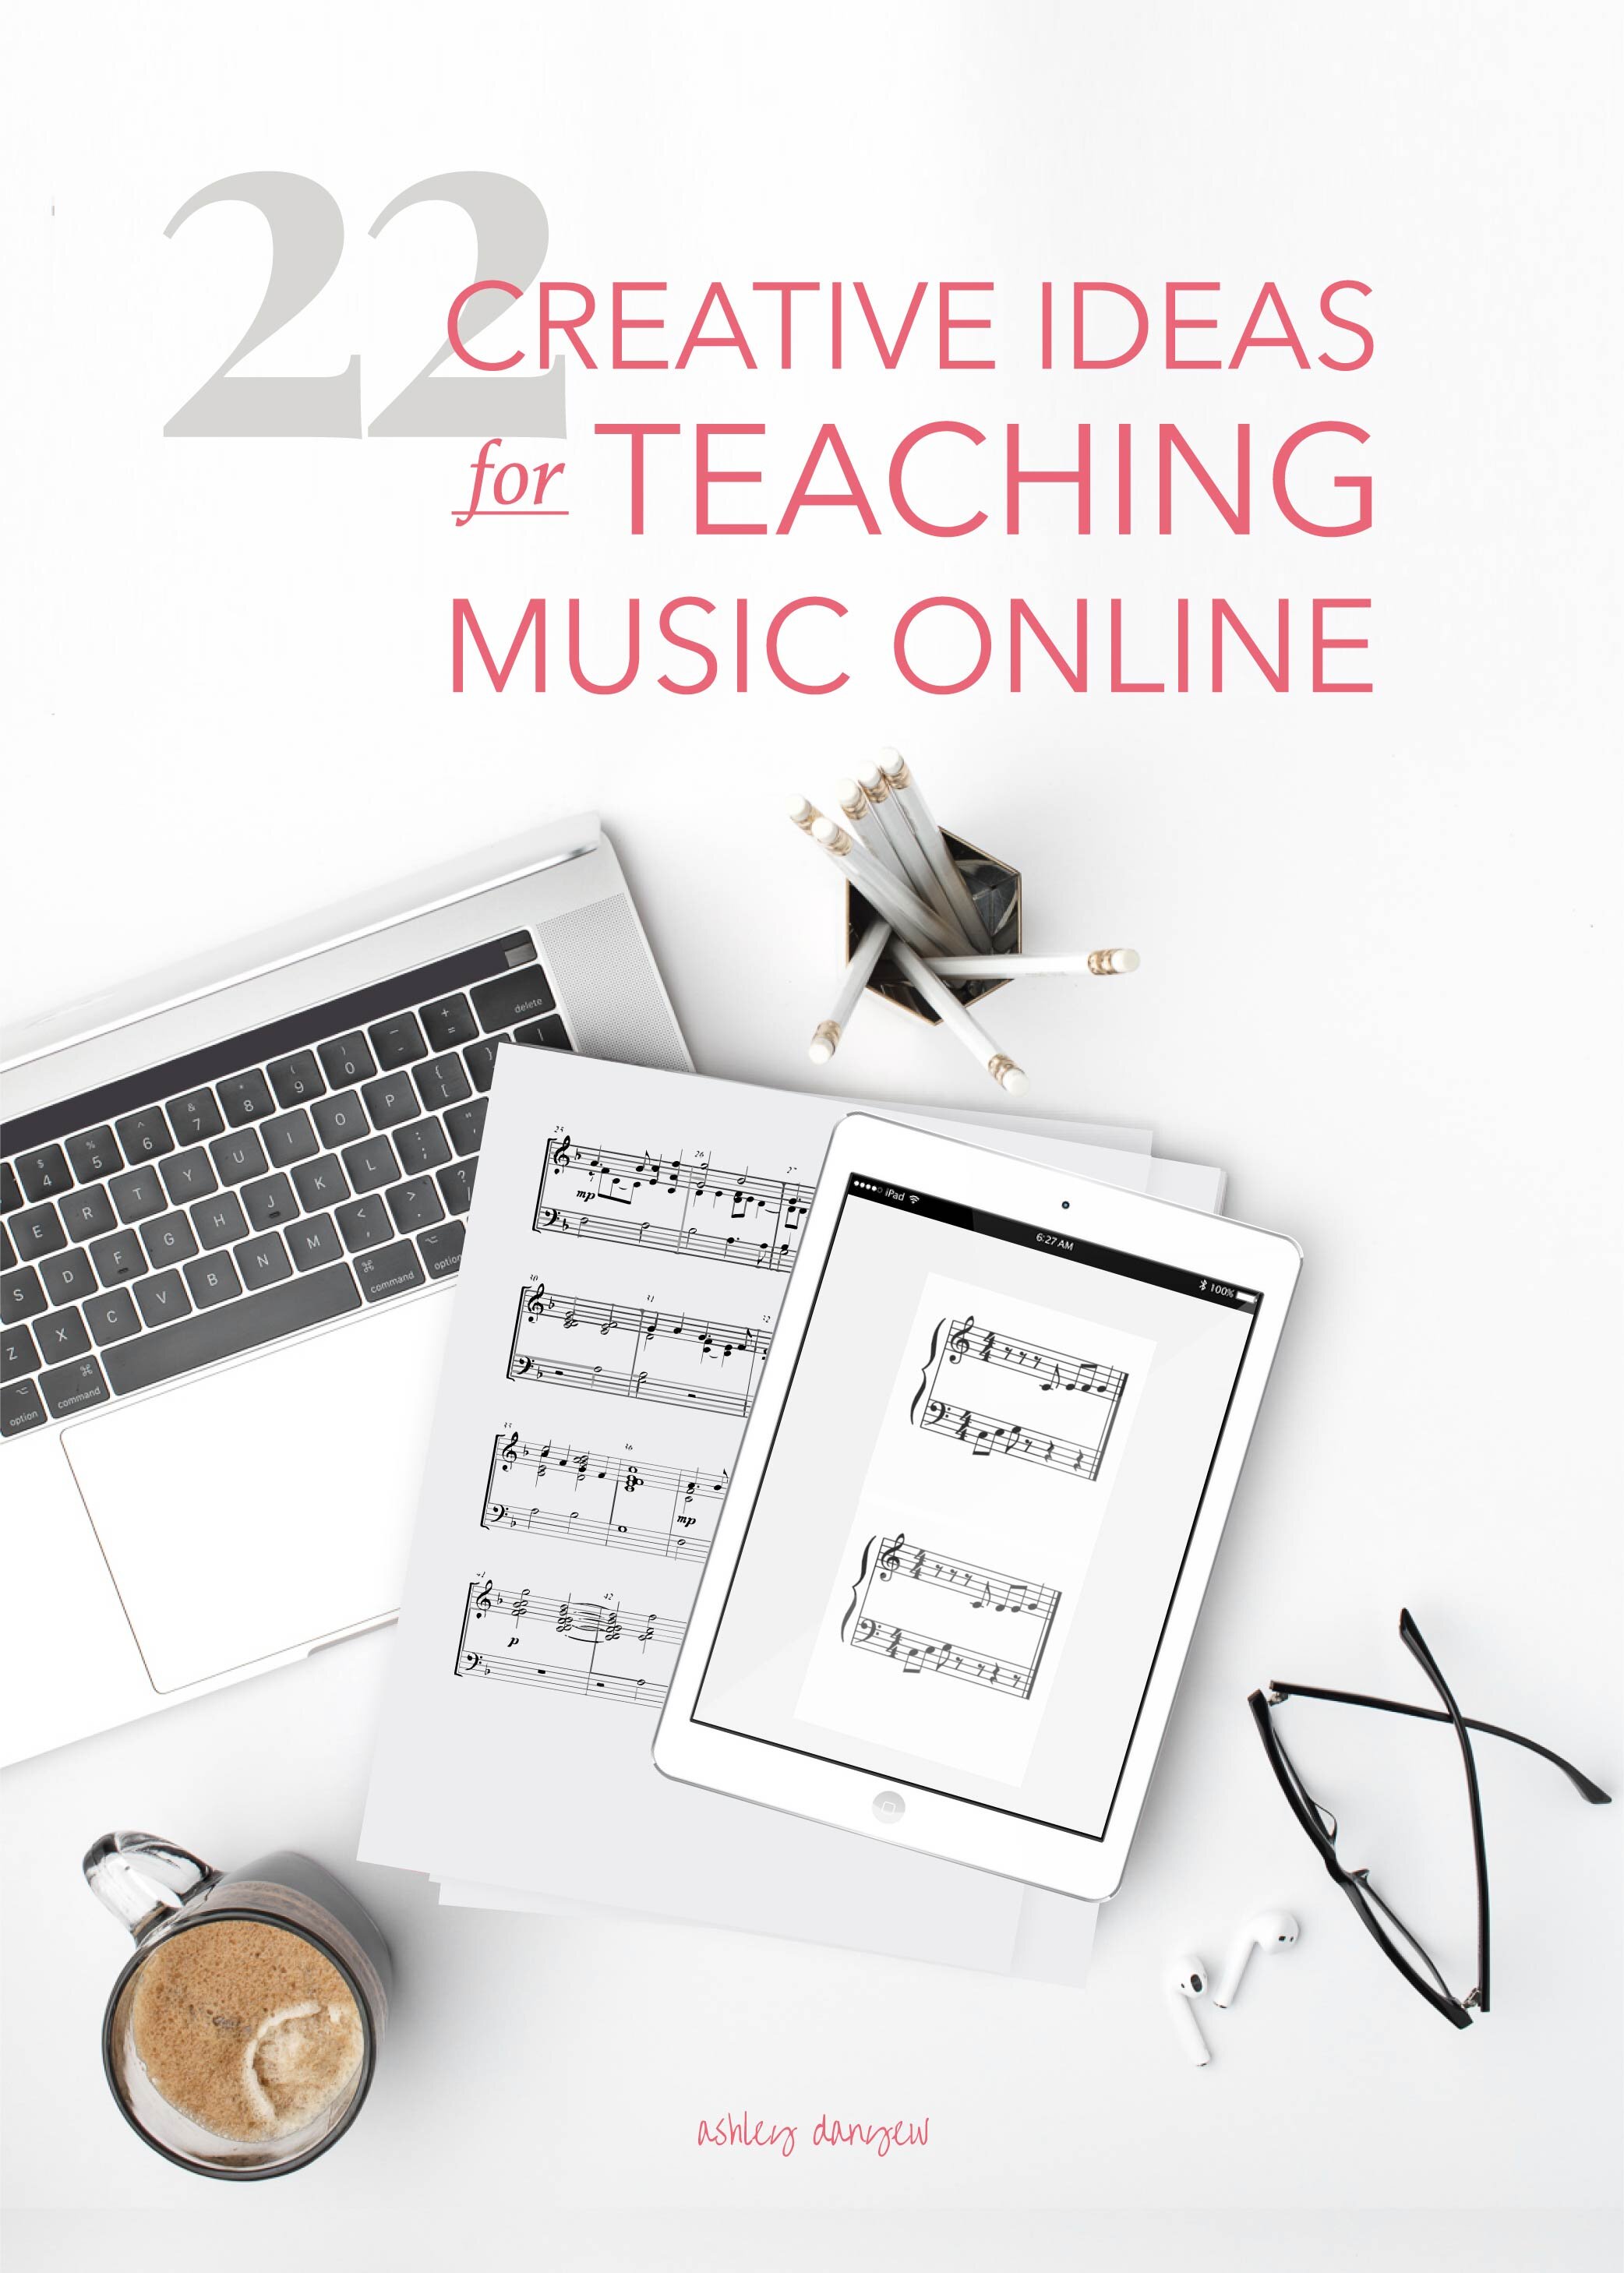 22 Creative Ideas for Teaching Music Online (for All Ages)